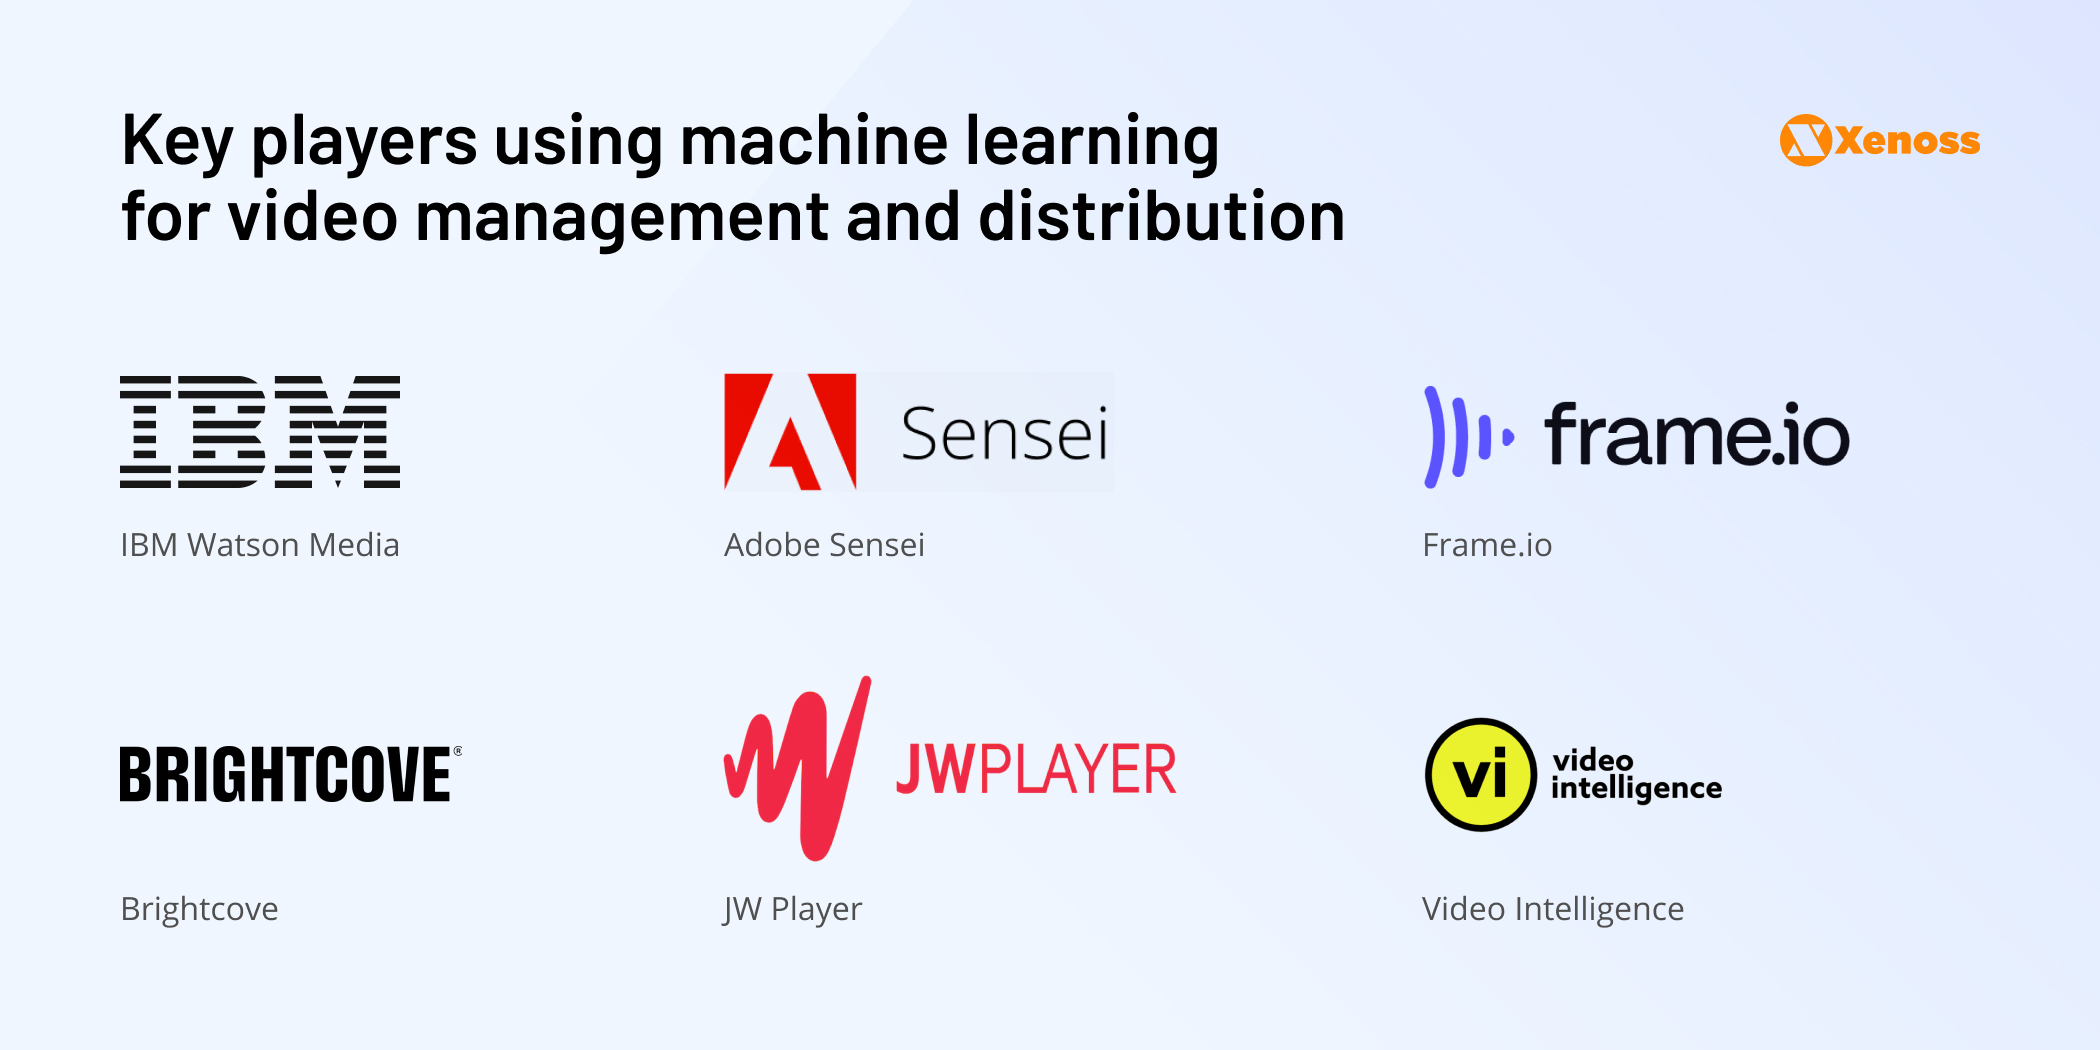 Machine learning applications for video management and distribution